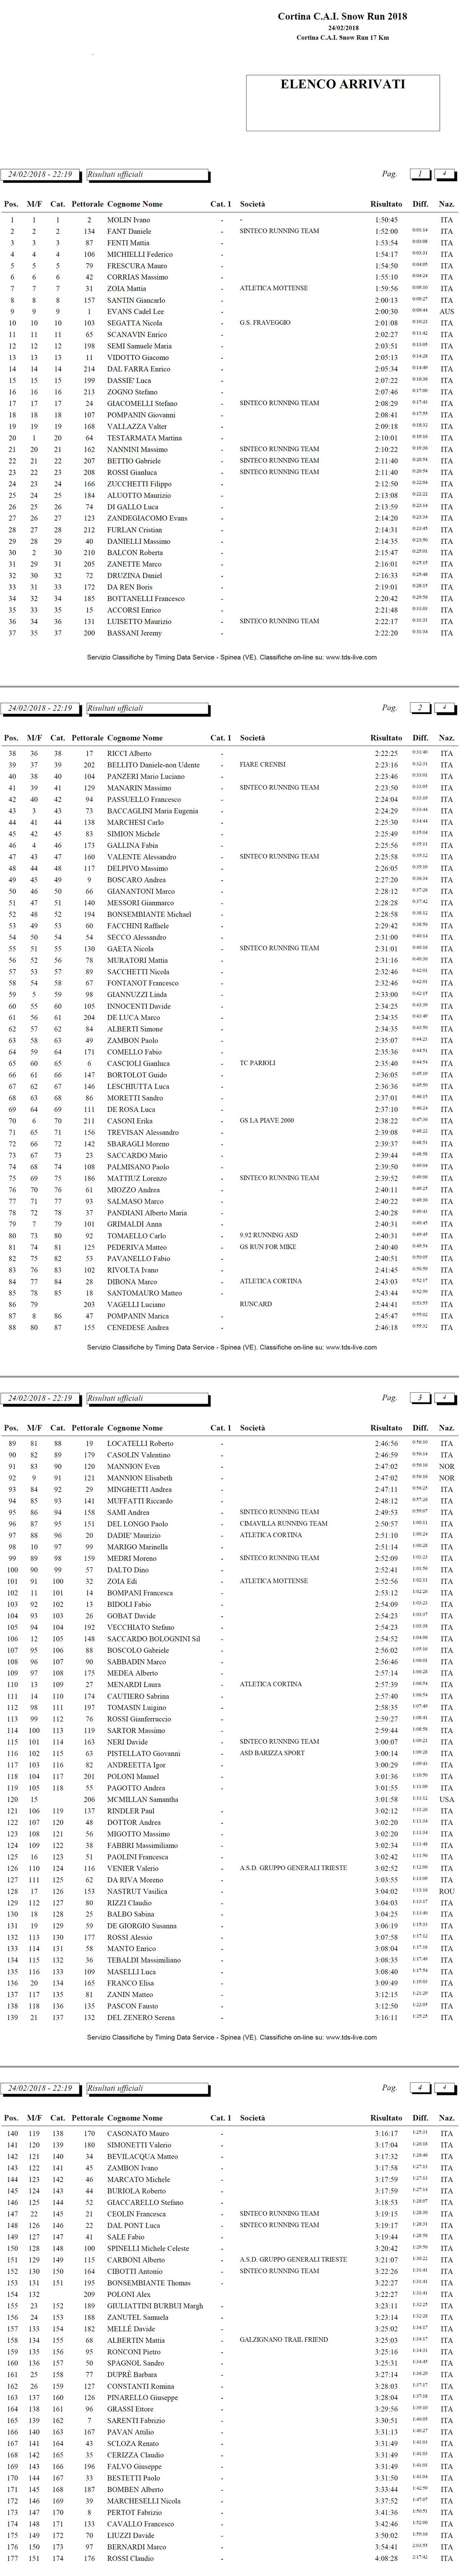 General results 17km - 2018